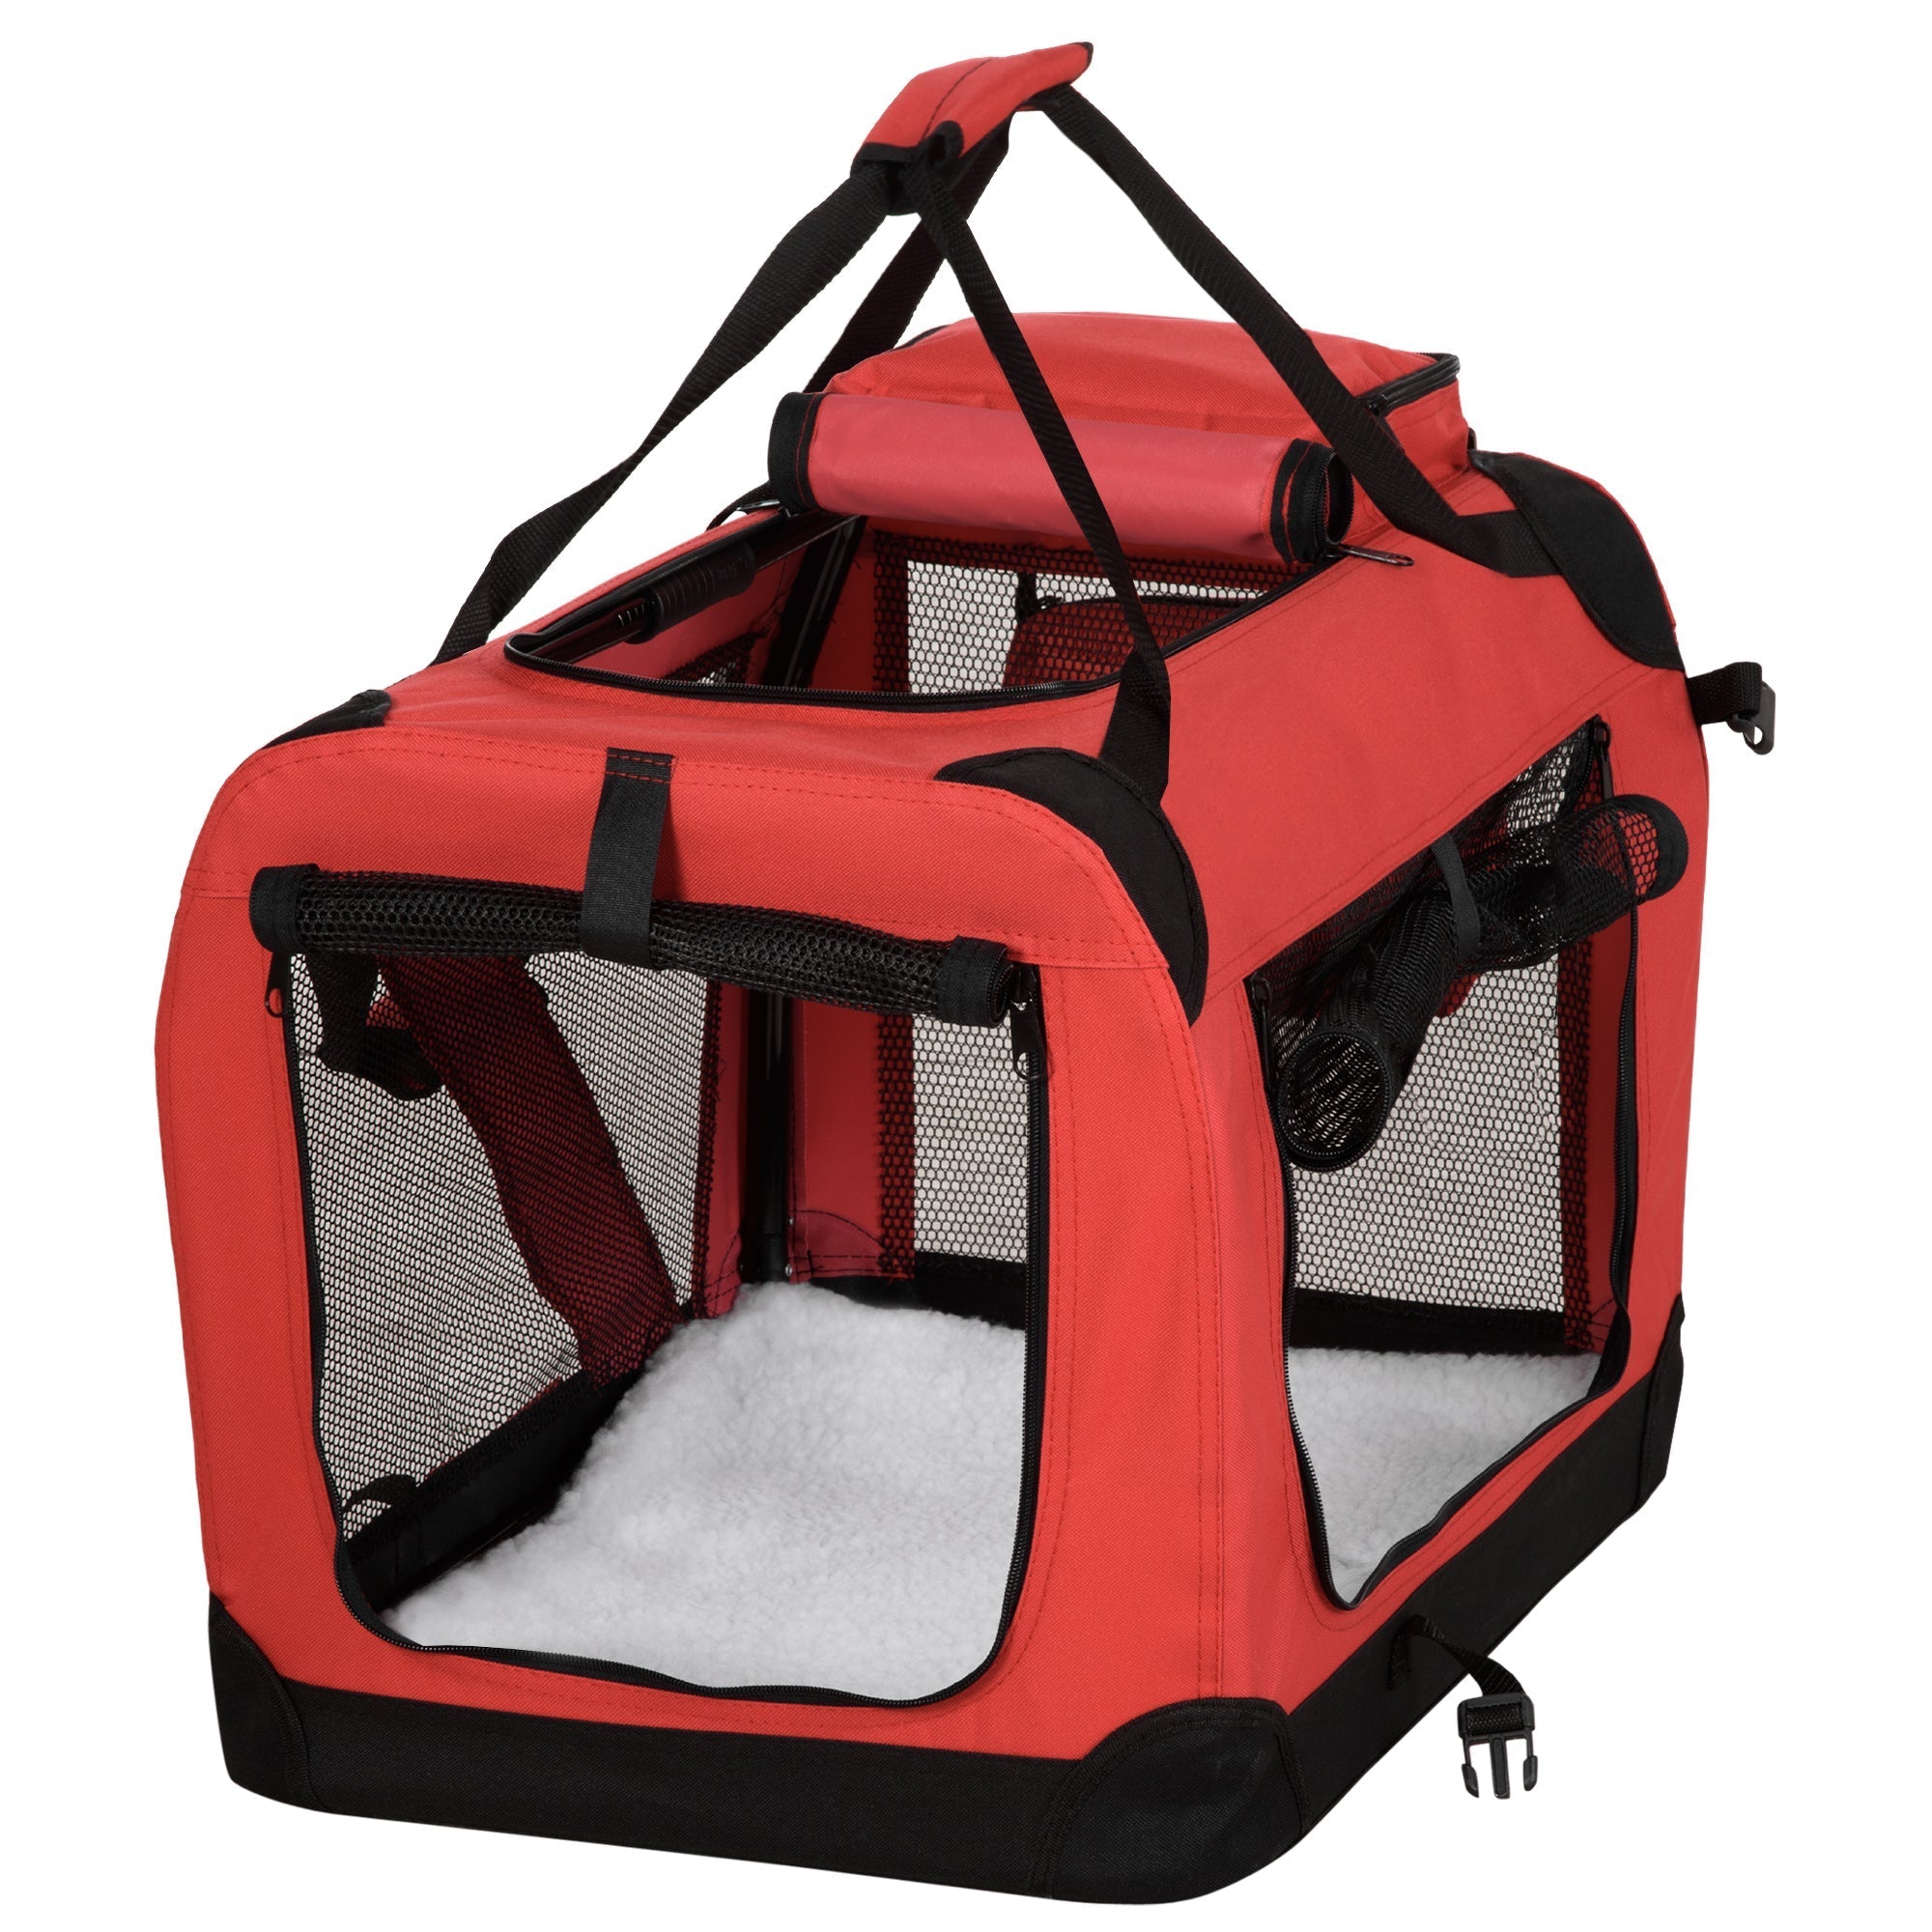 Foldable Red Pet Carrier with Mesh Window - 60x42x42cm, PawHut,